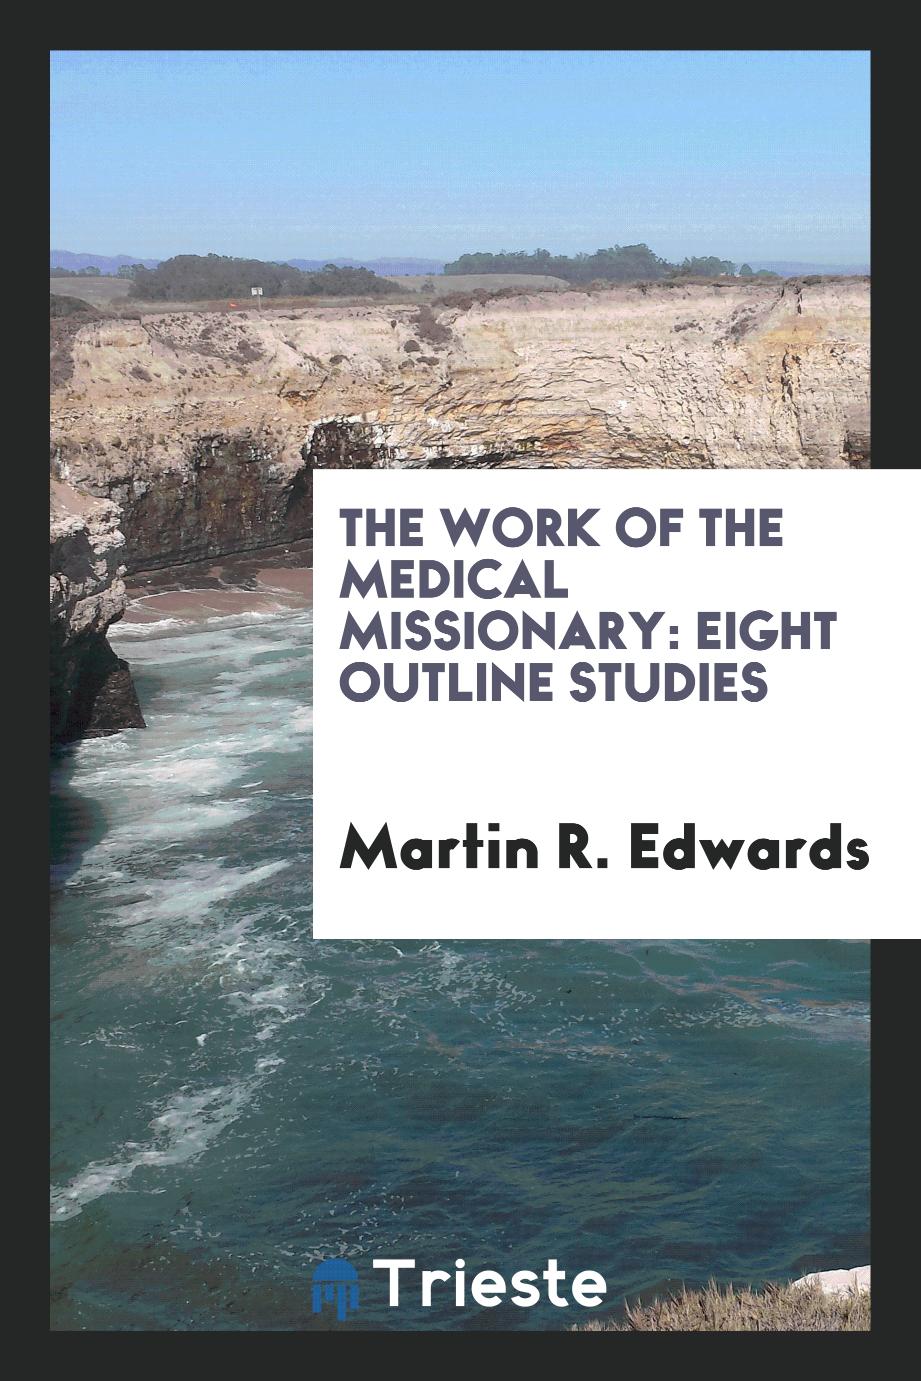 The Work of the Medical Missionary: Eight Outline Studies